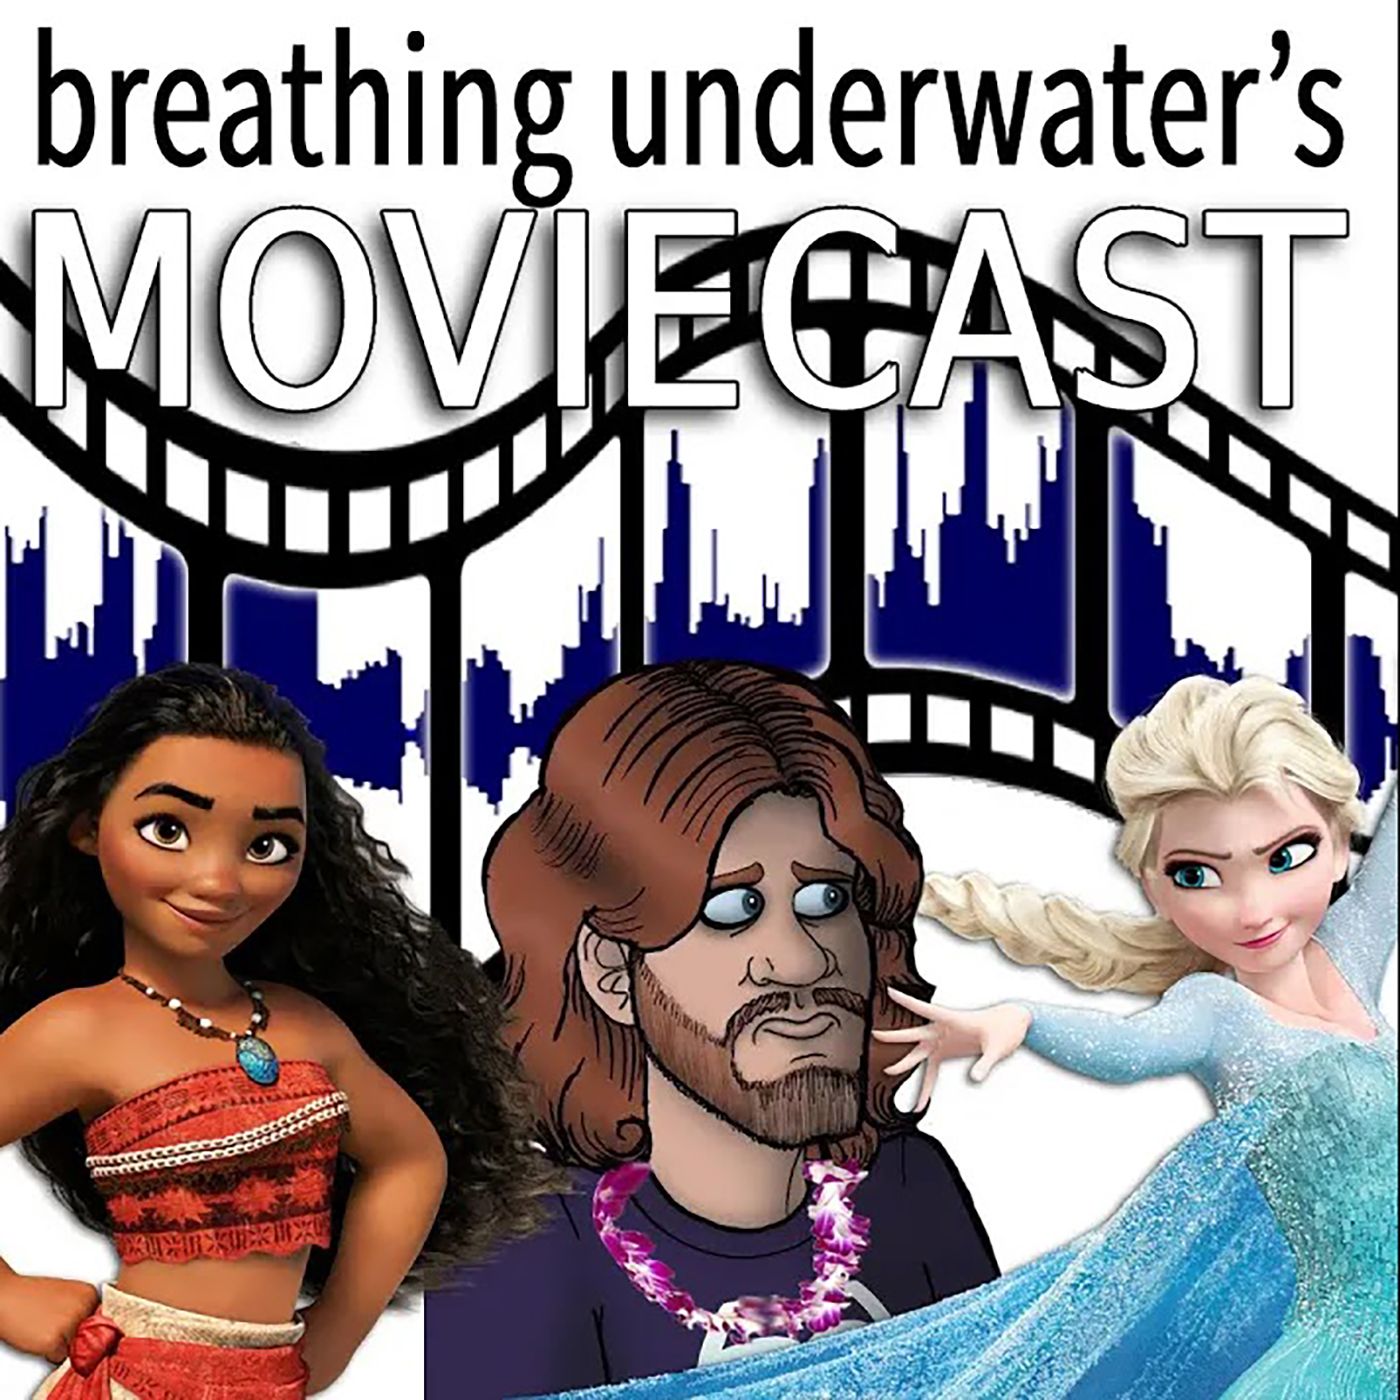 Moana is Superior to Frozen in Every Way (Moviecast 6)